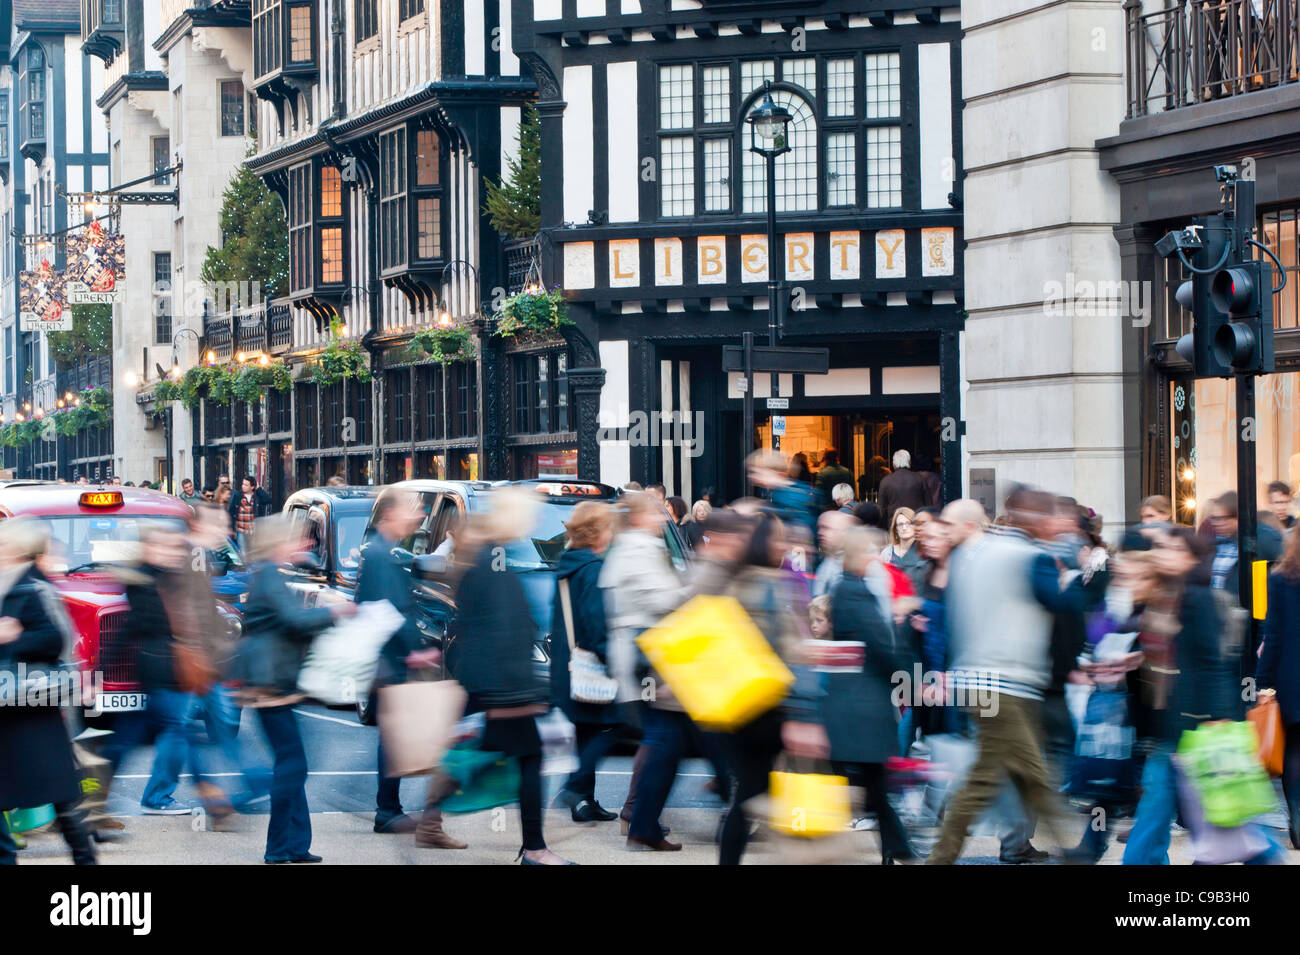 Regent Street busy with shoppers, London, United Kingdom Stock Photo